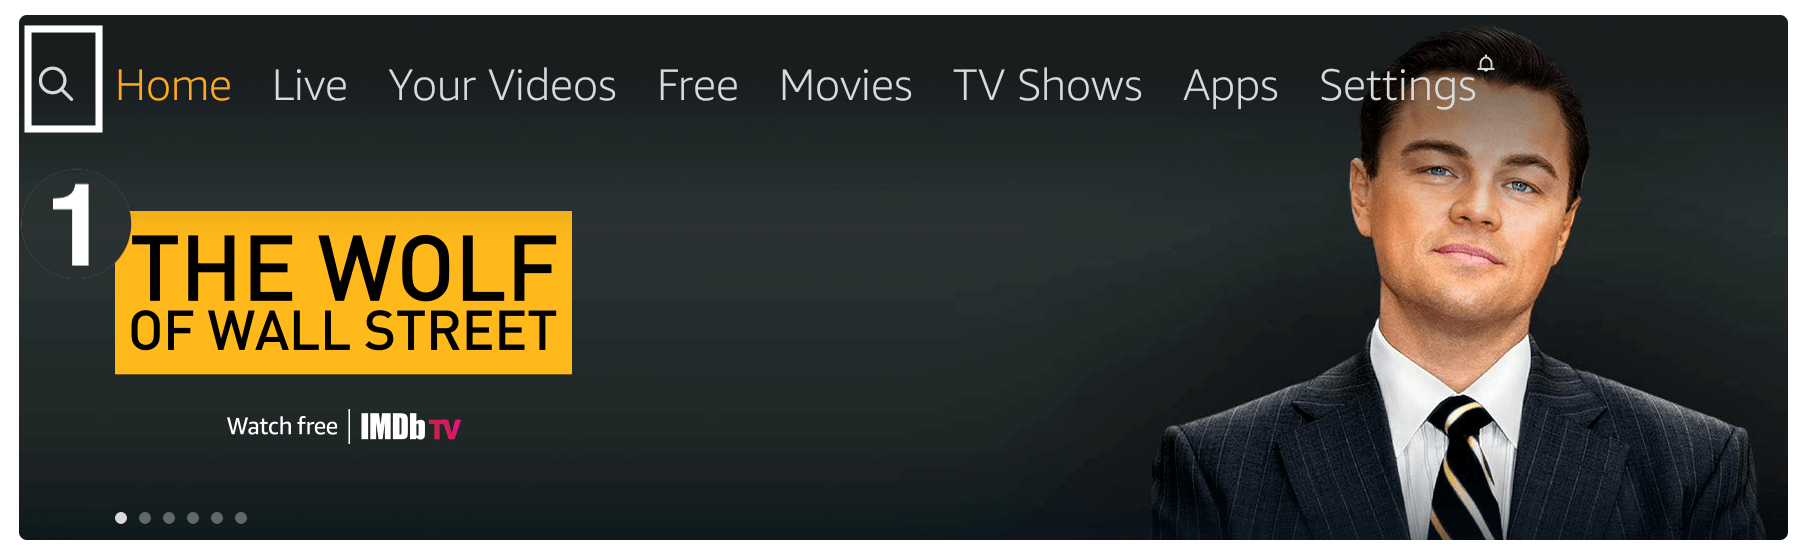 Freeview-Firestick-Device